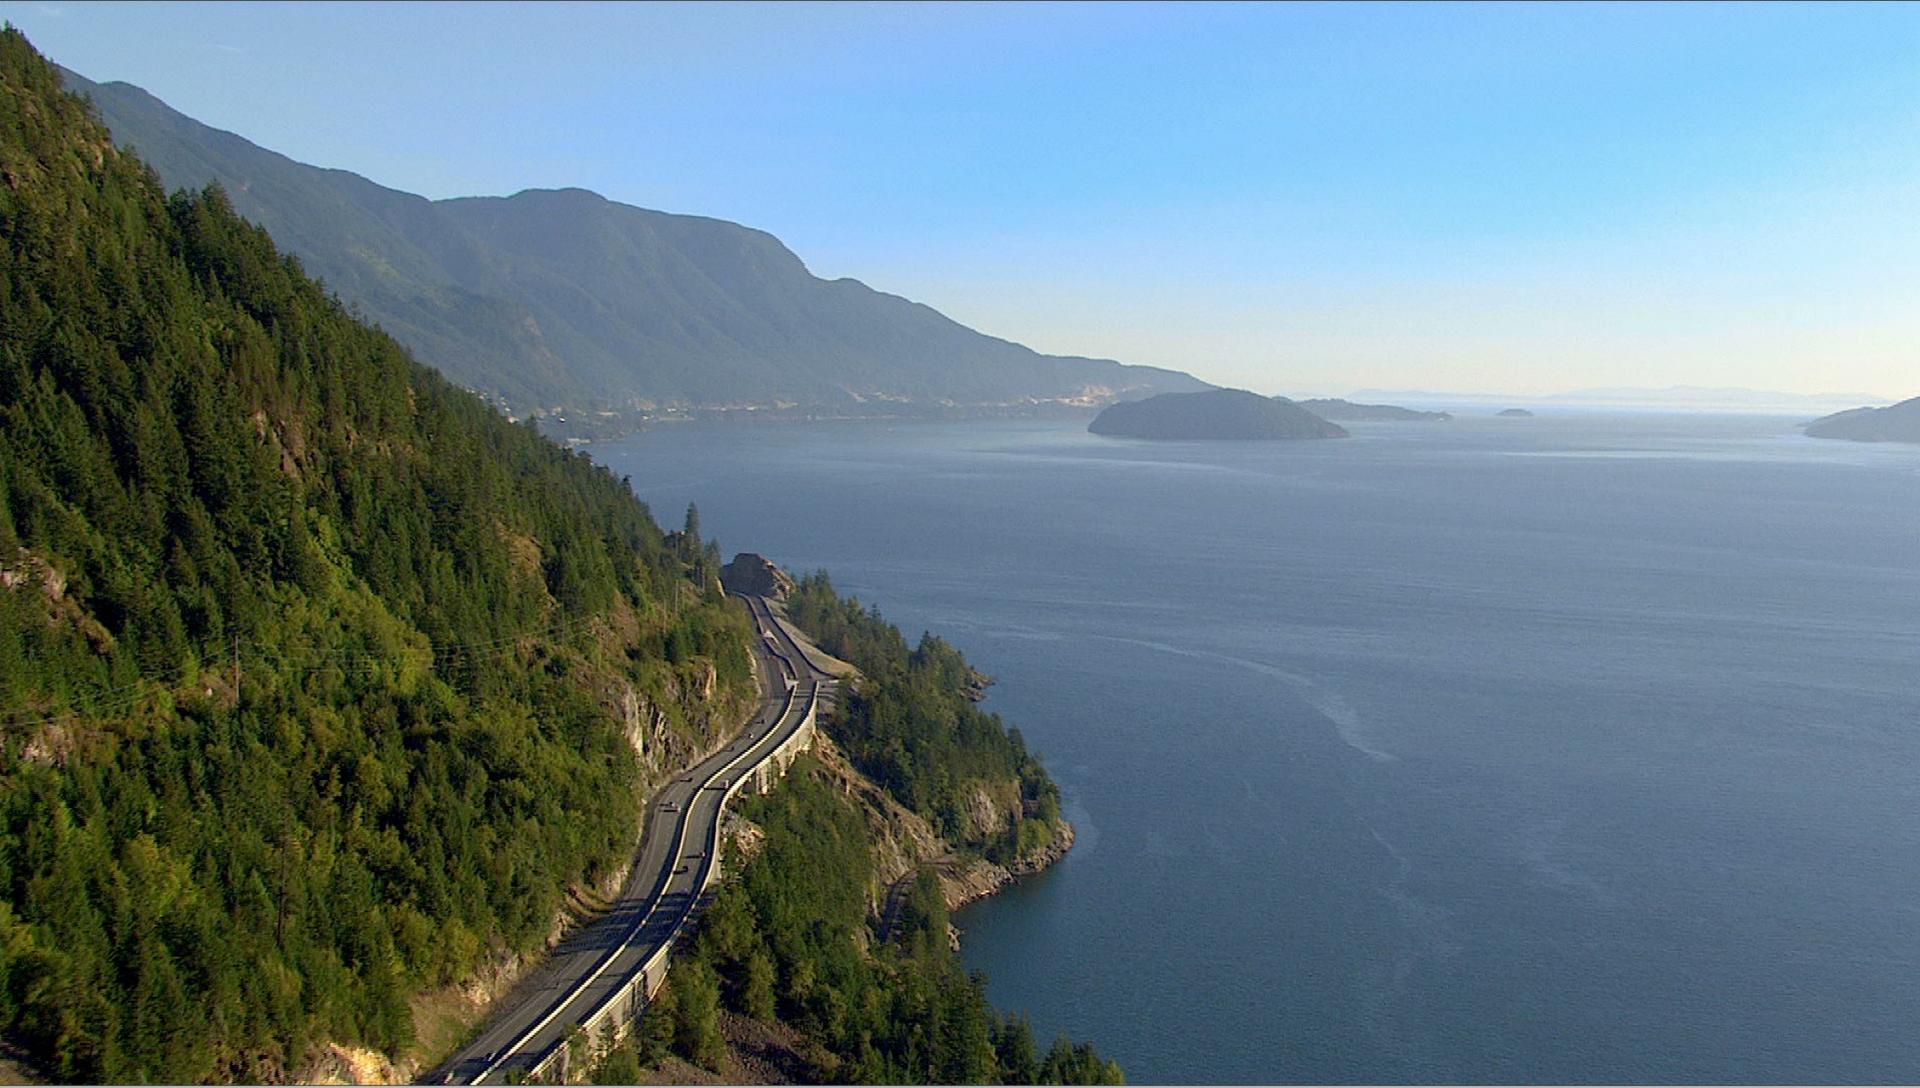 The Sea-to-Sky Highway